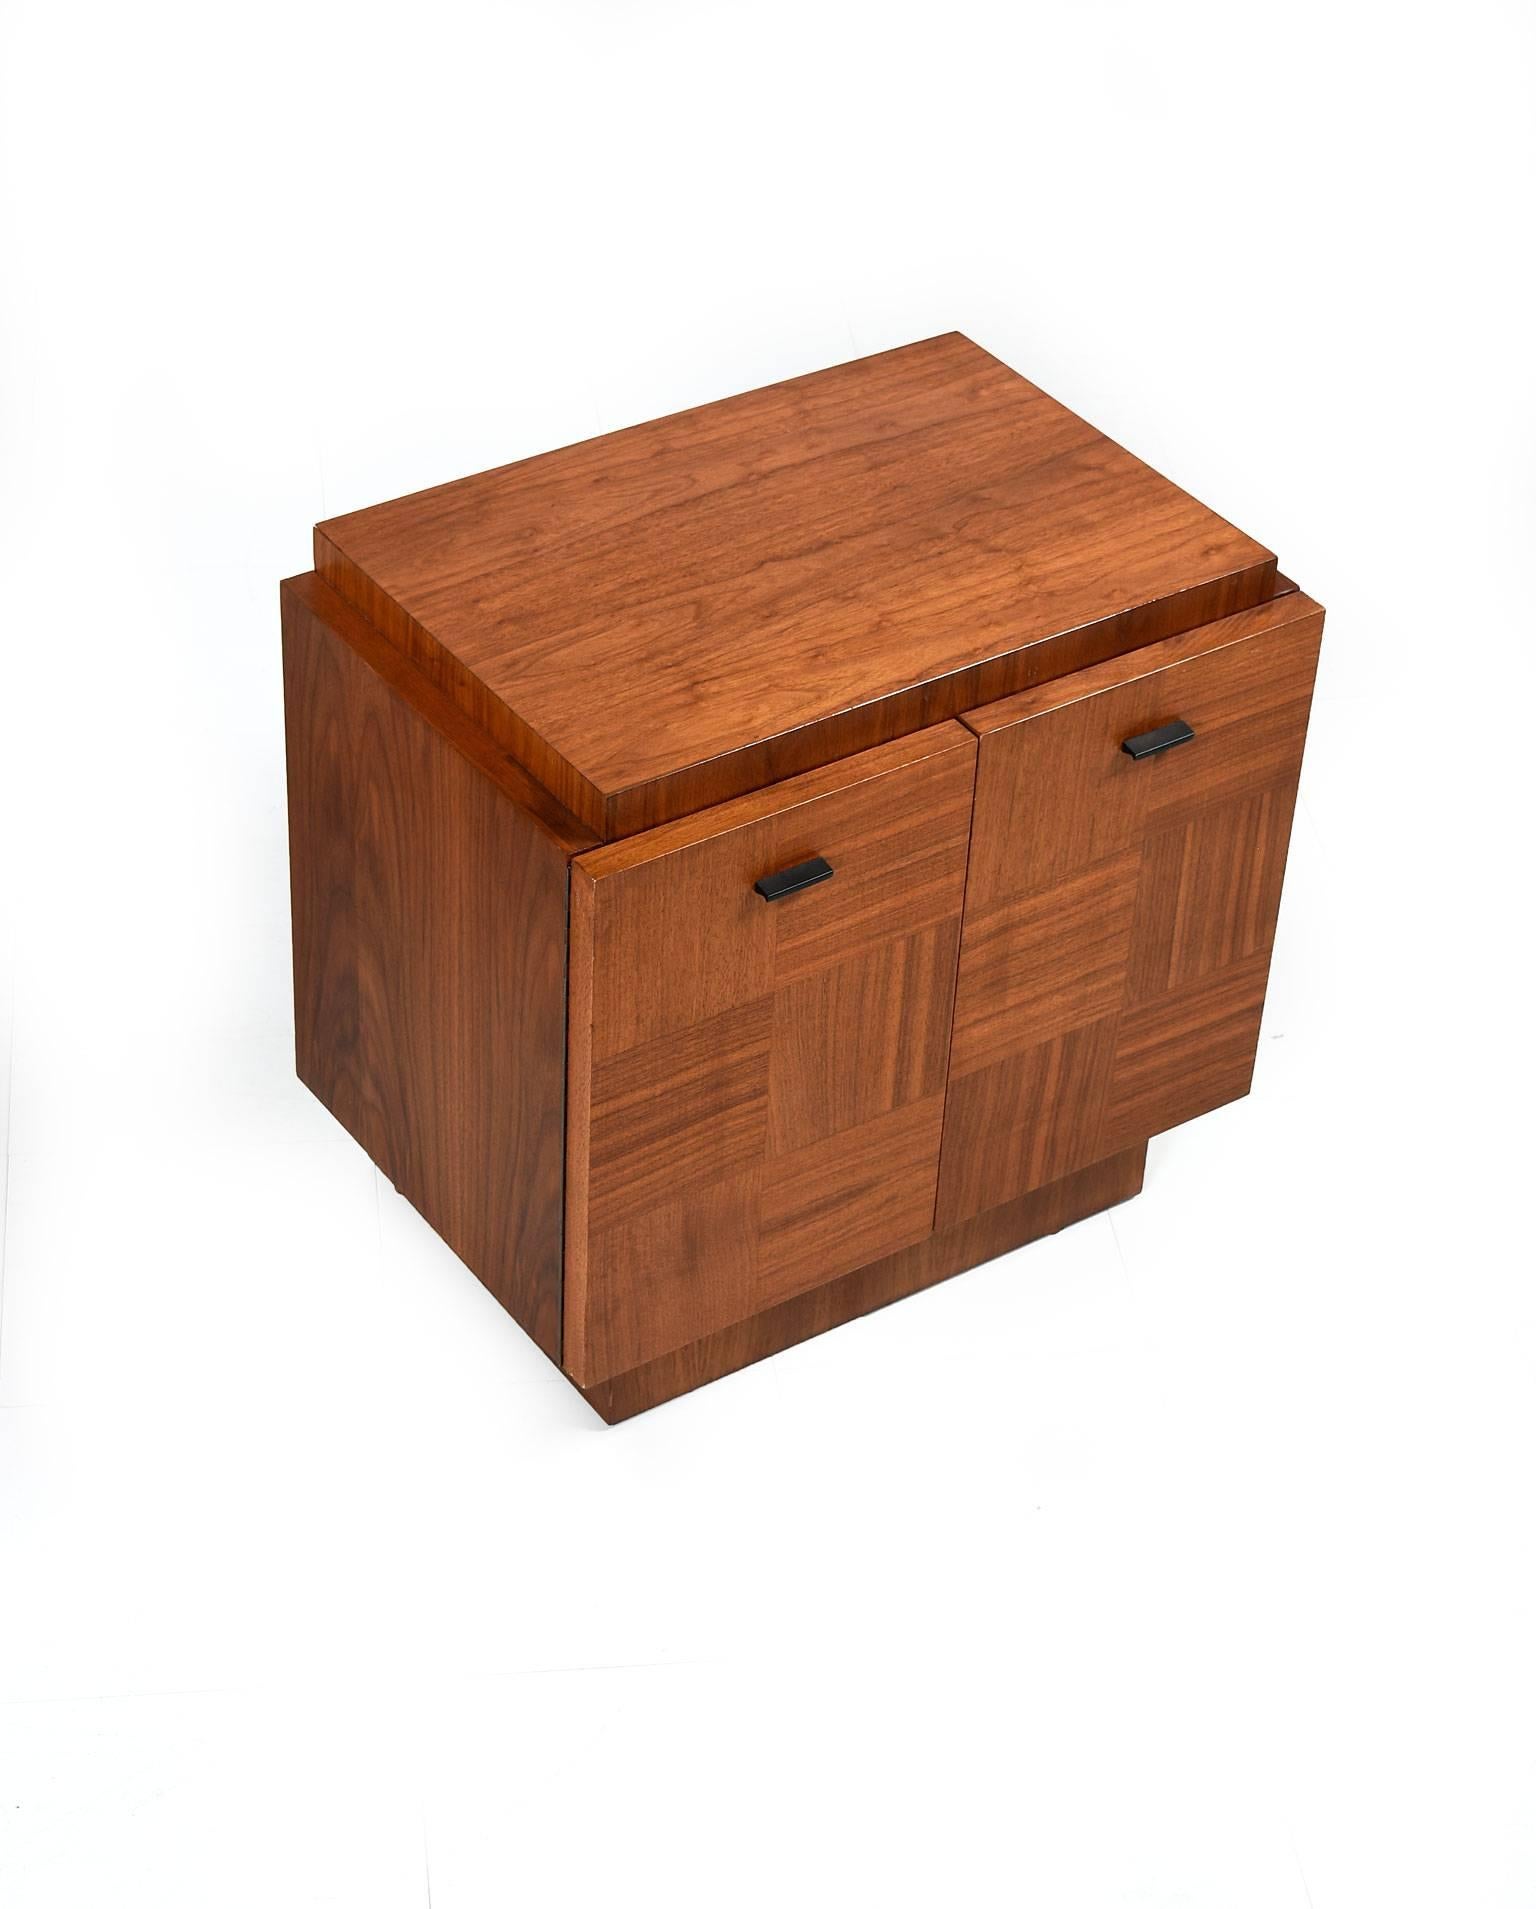 Pair of Mid-Century Canadian Brutalist nightstands. Time capsule pieces in outstanding original condition. Vintage, 1970s. Masculine, monumental form is accented by a handsome parquet walnut wood. Highlights of the parquet opposing grain are